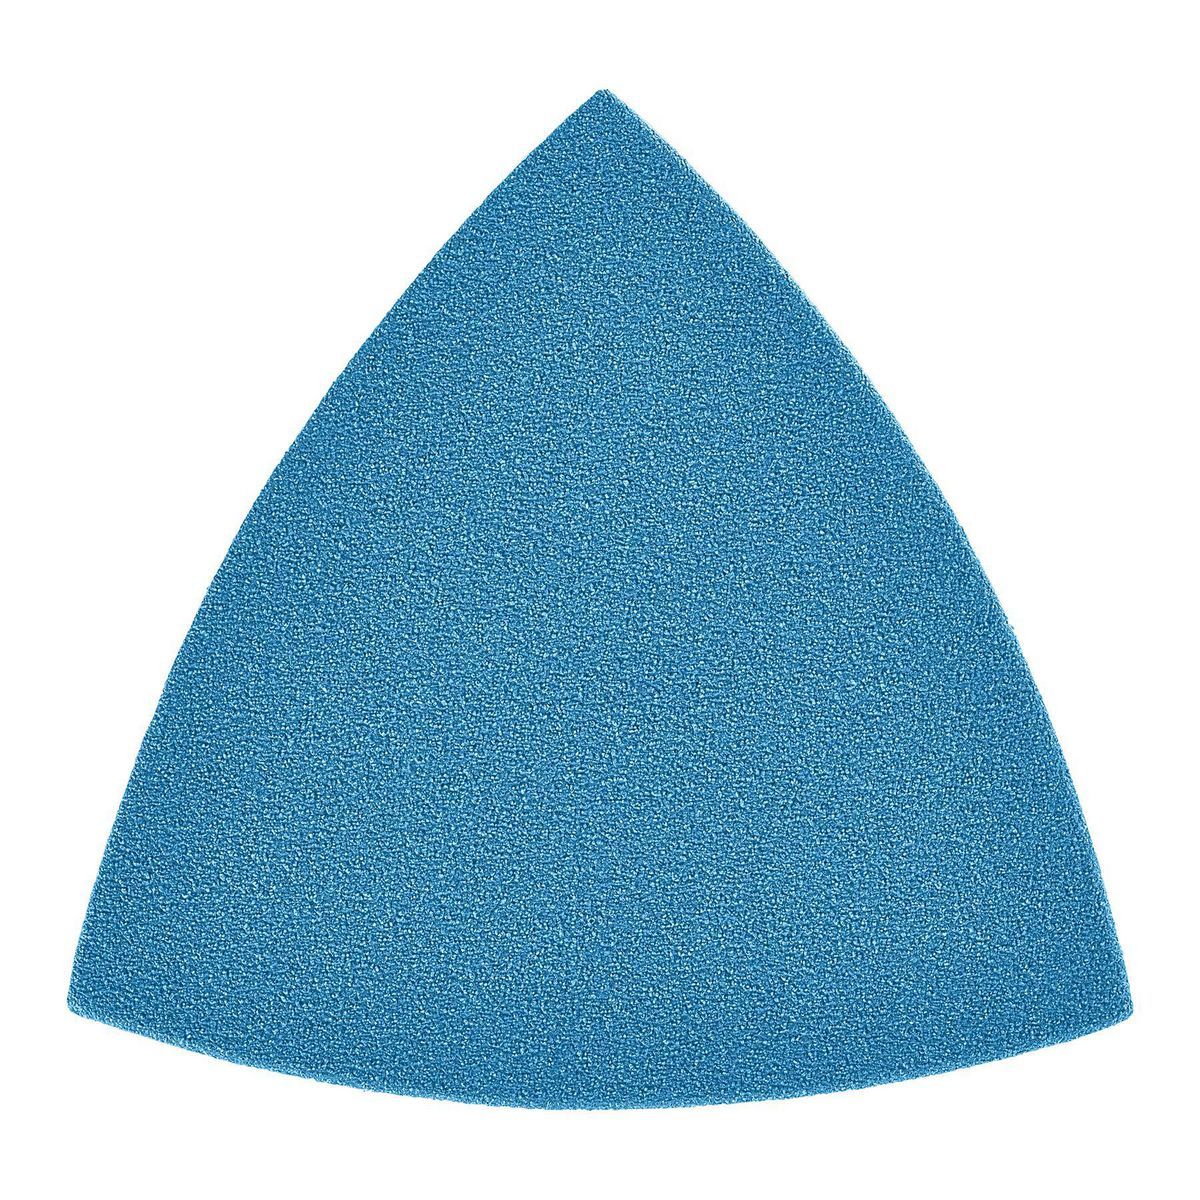 120 Grit Hook and Loop Triangle Detail Sanding Sheets for Oscillating Multi-Tools, 5-Pack